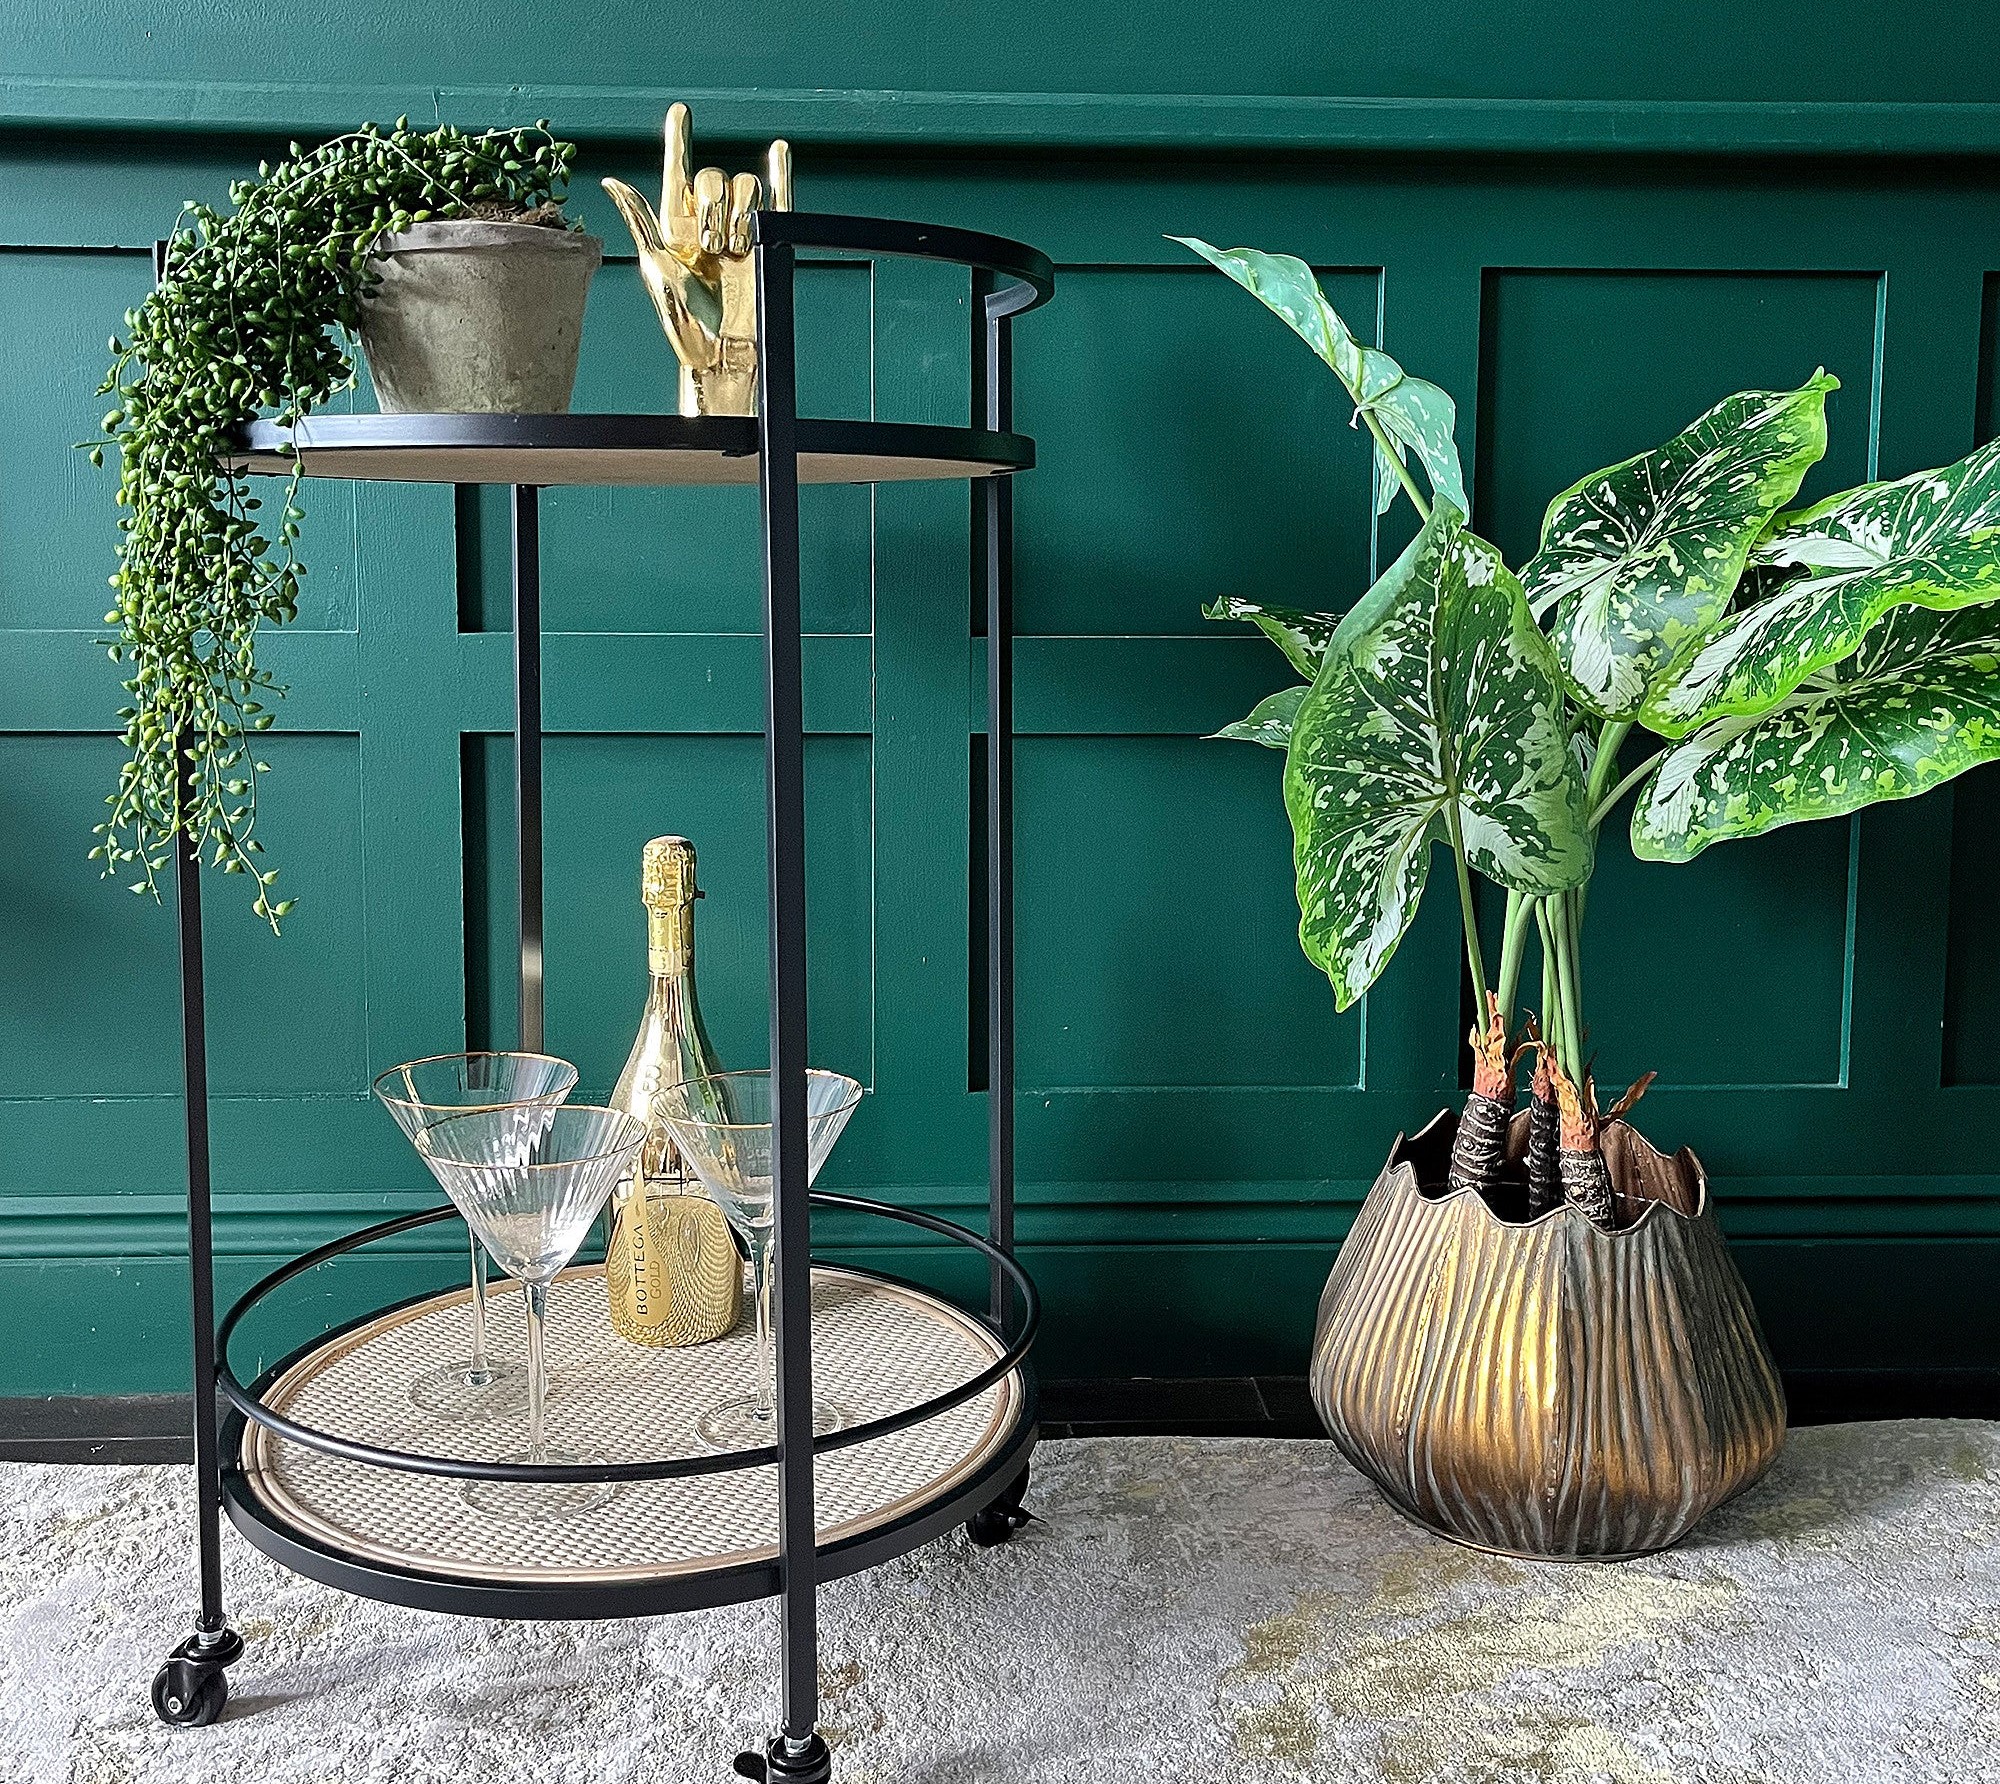 A black metal and rattan drinks trolley with glasses and plant pots